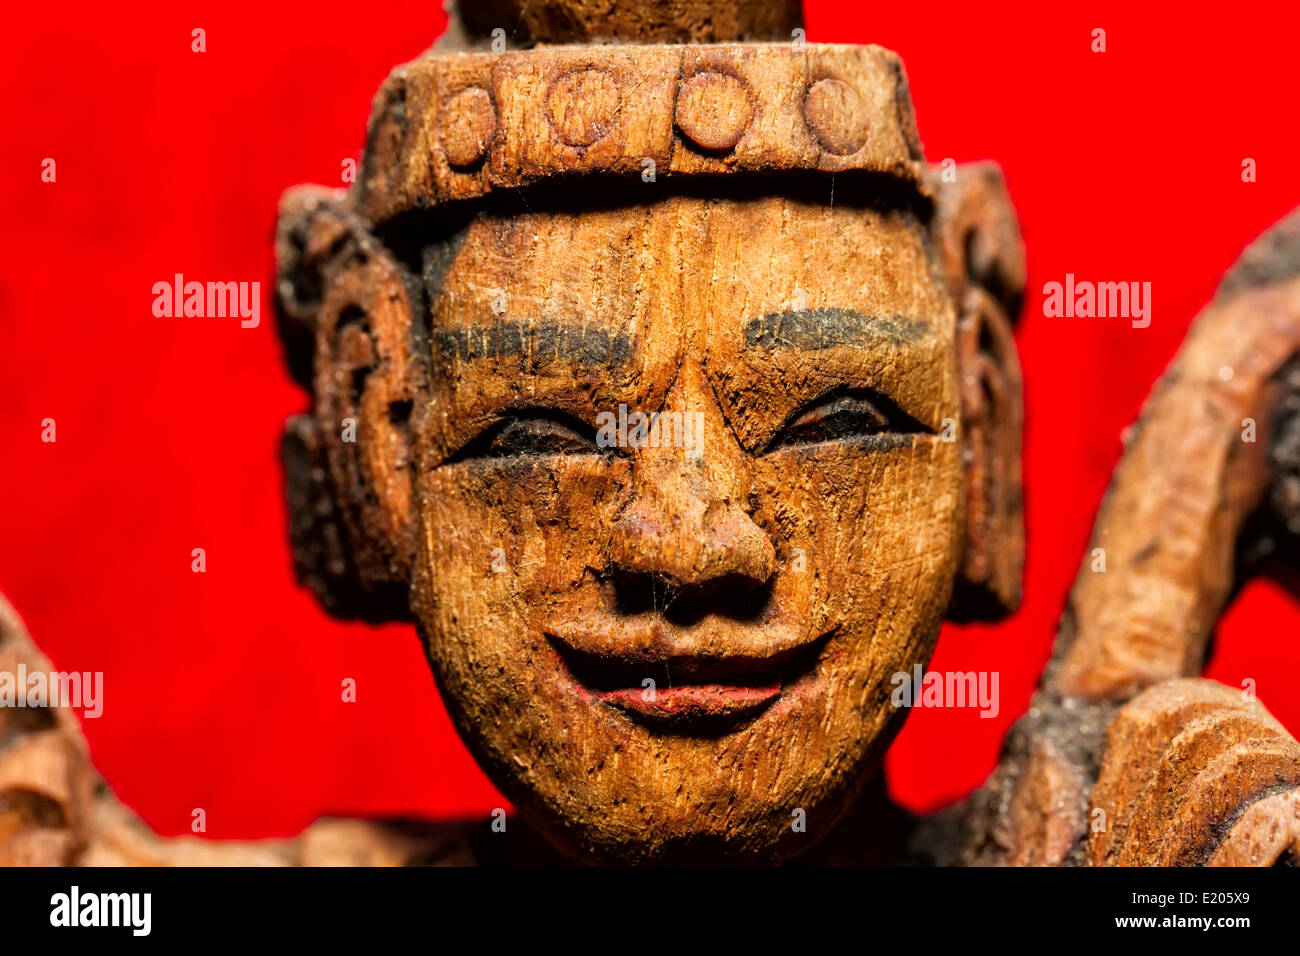 Carved wooden figure Shwe In Bin Kyaung Pagoda with a bright red pillar in background Mandalay Myanmar Burma Stock Photo